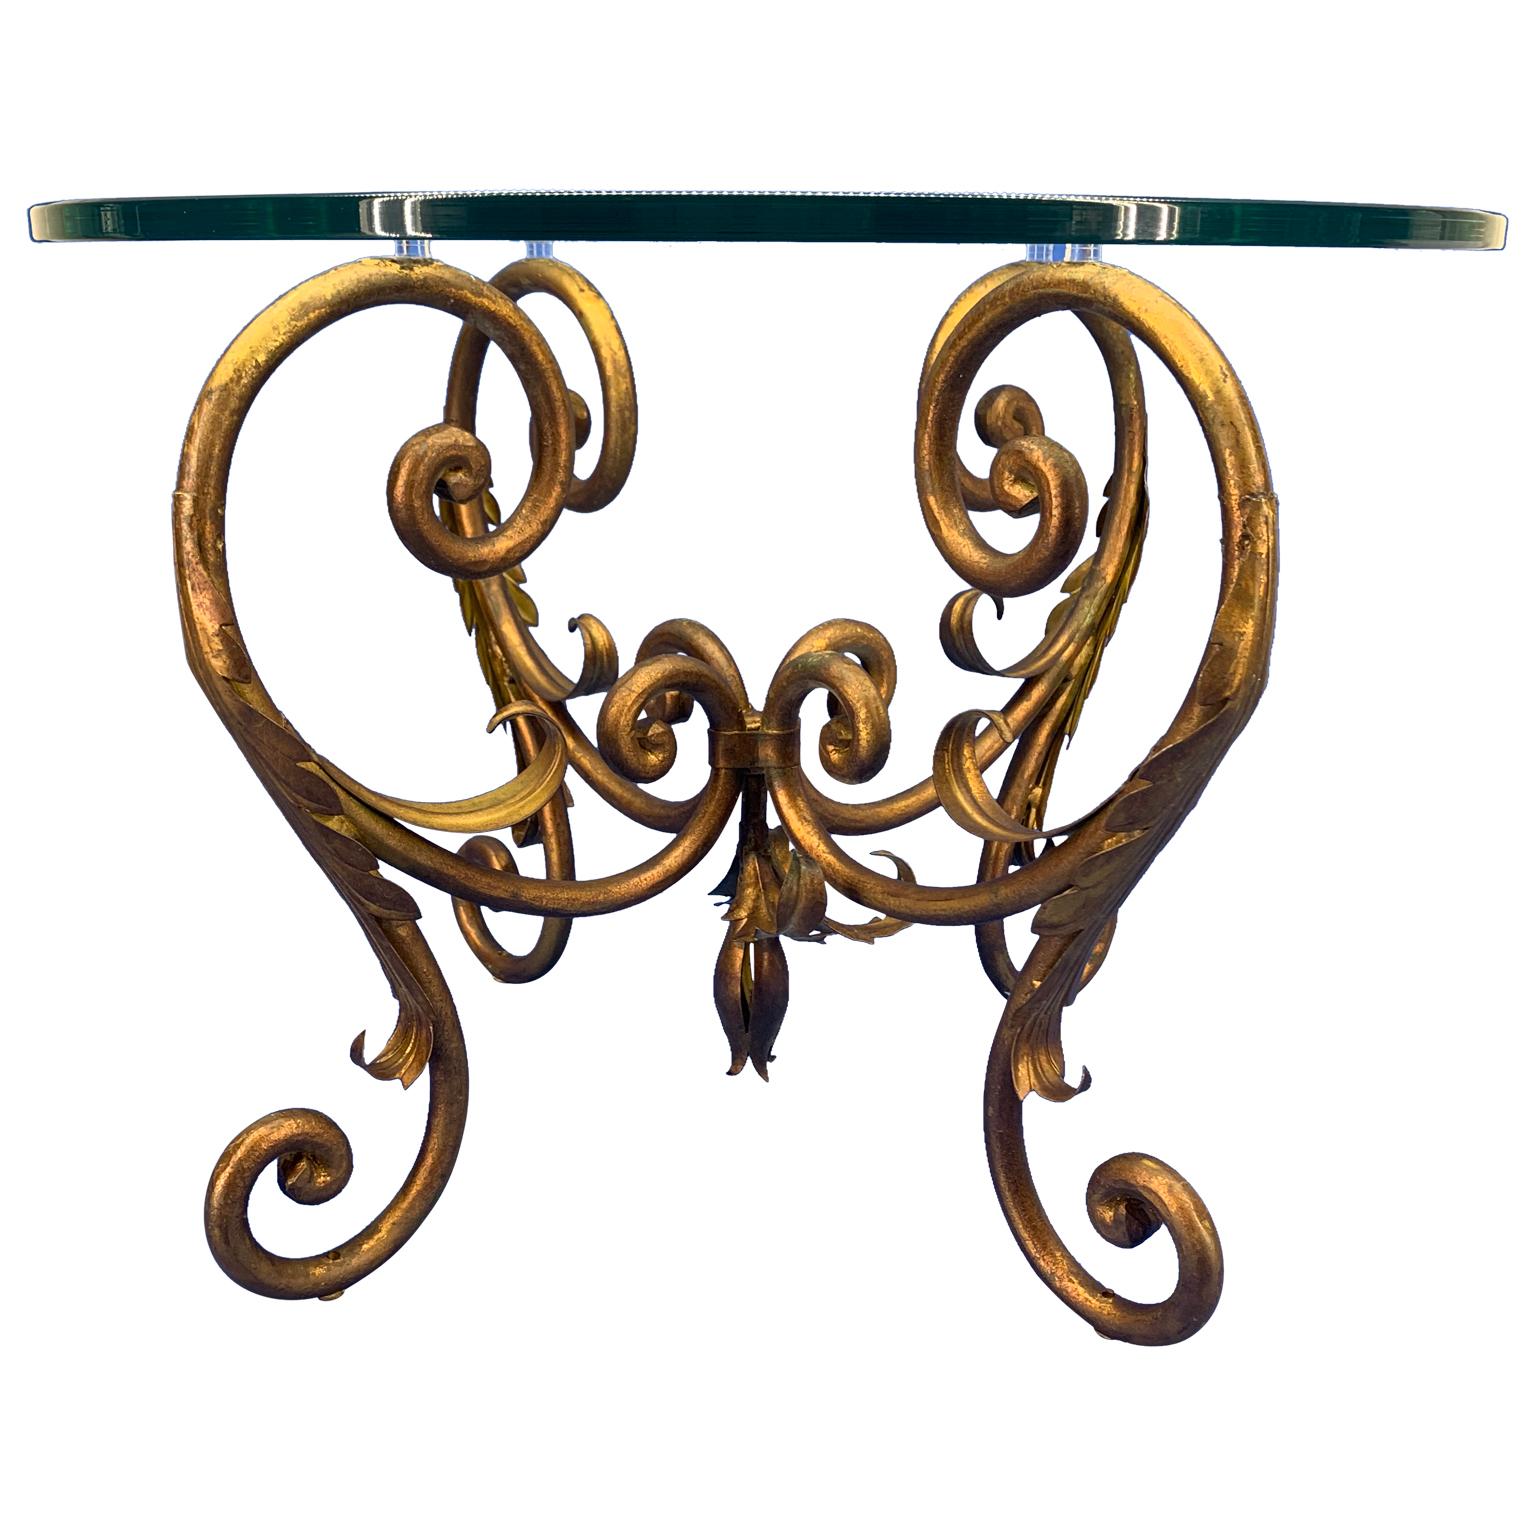 Italian pair of vintage scrolled Hollywood Regency style gilt iron and glass end or side tables.

Tables are solid metal, heavy and in good sturdy condition.